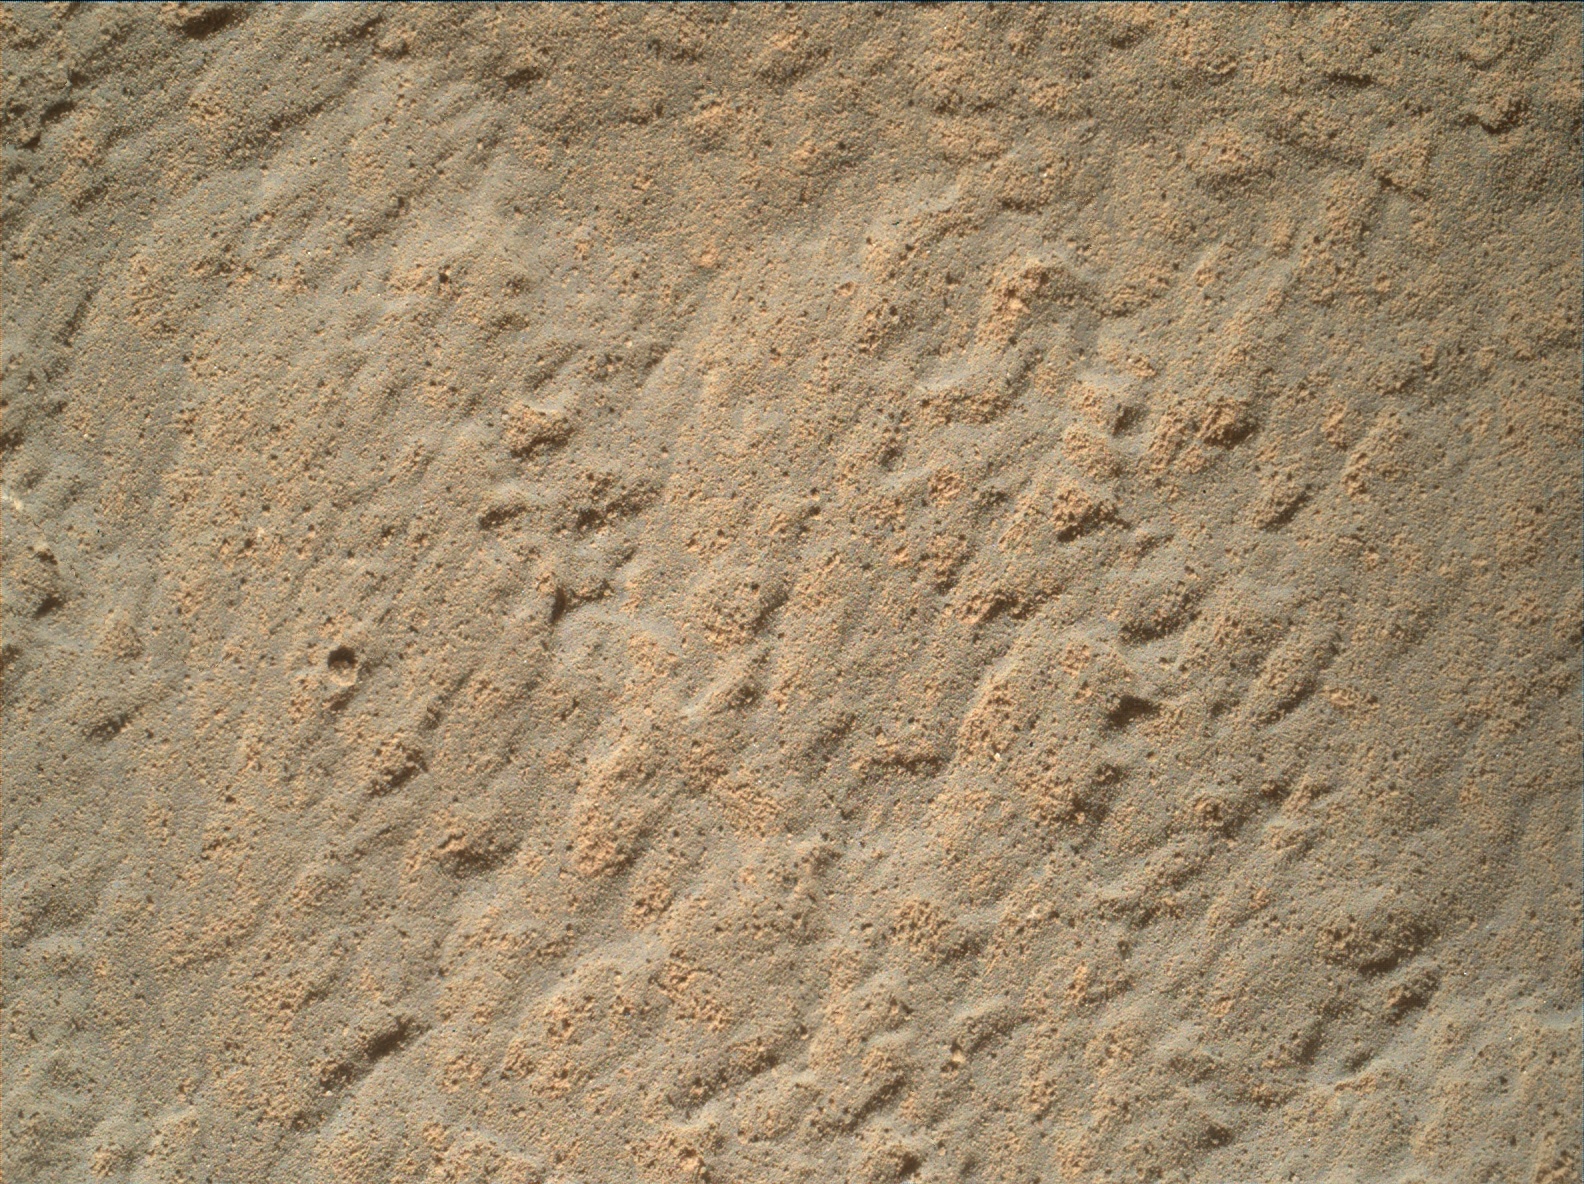 Nasa's Mars rover Curiosity acquired this image using its Mars Hand Lens Imager (MAHLI) on Sol 1268